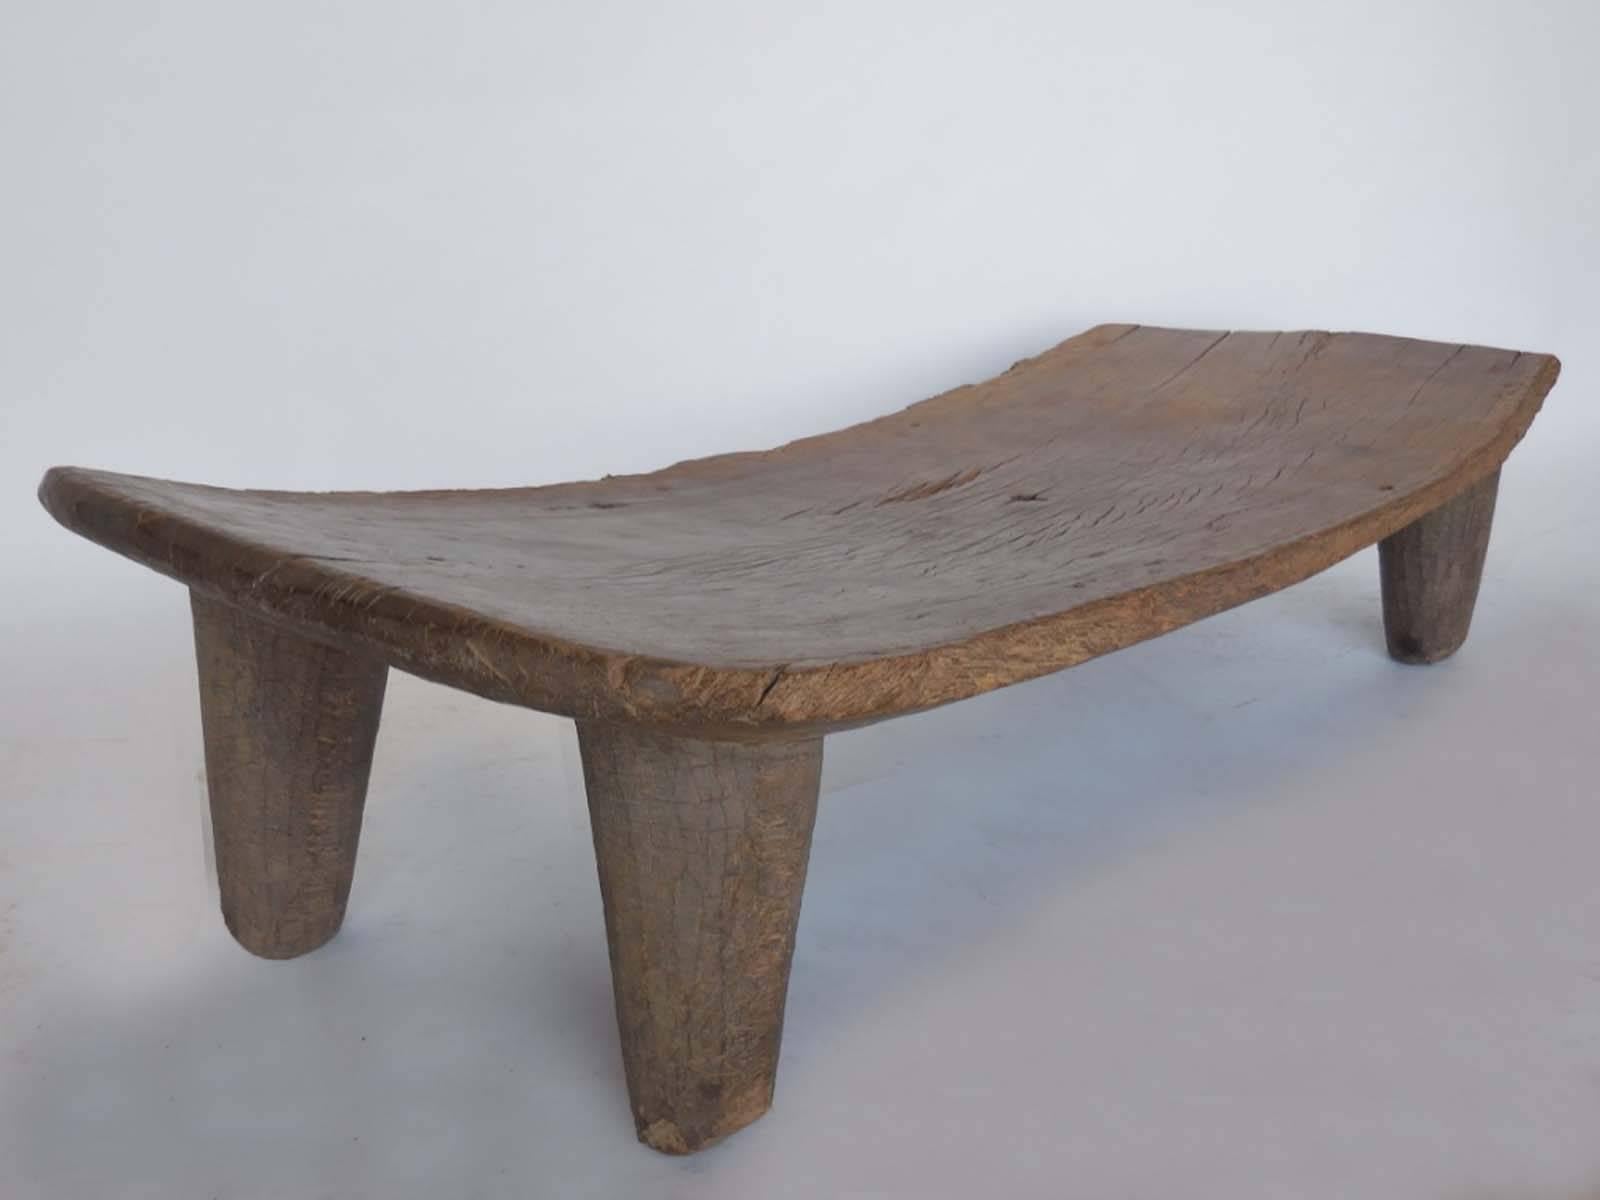 Nigerian Antique African Nupe Child's Bed, Coffee Table or Bench